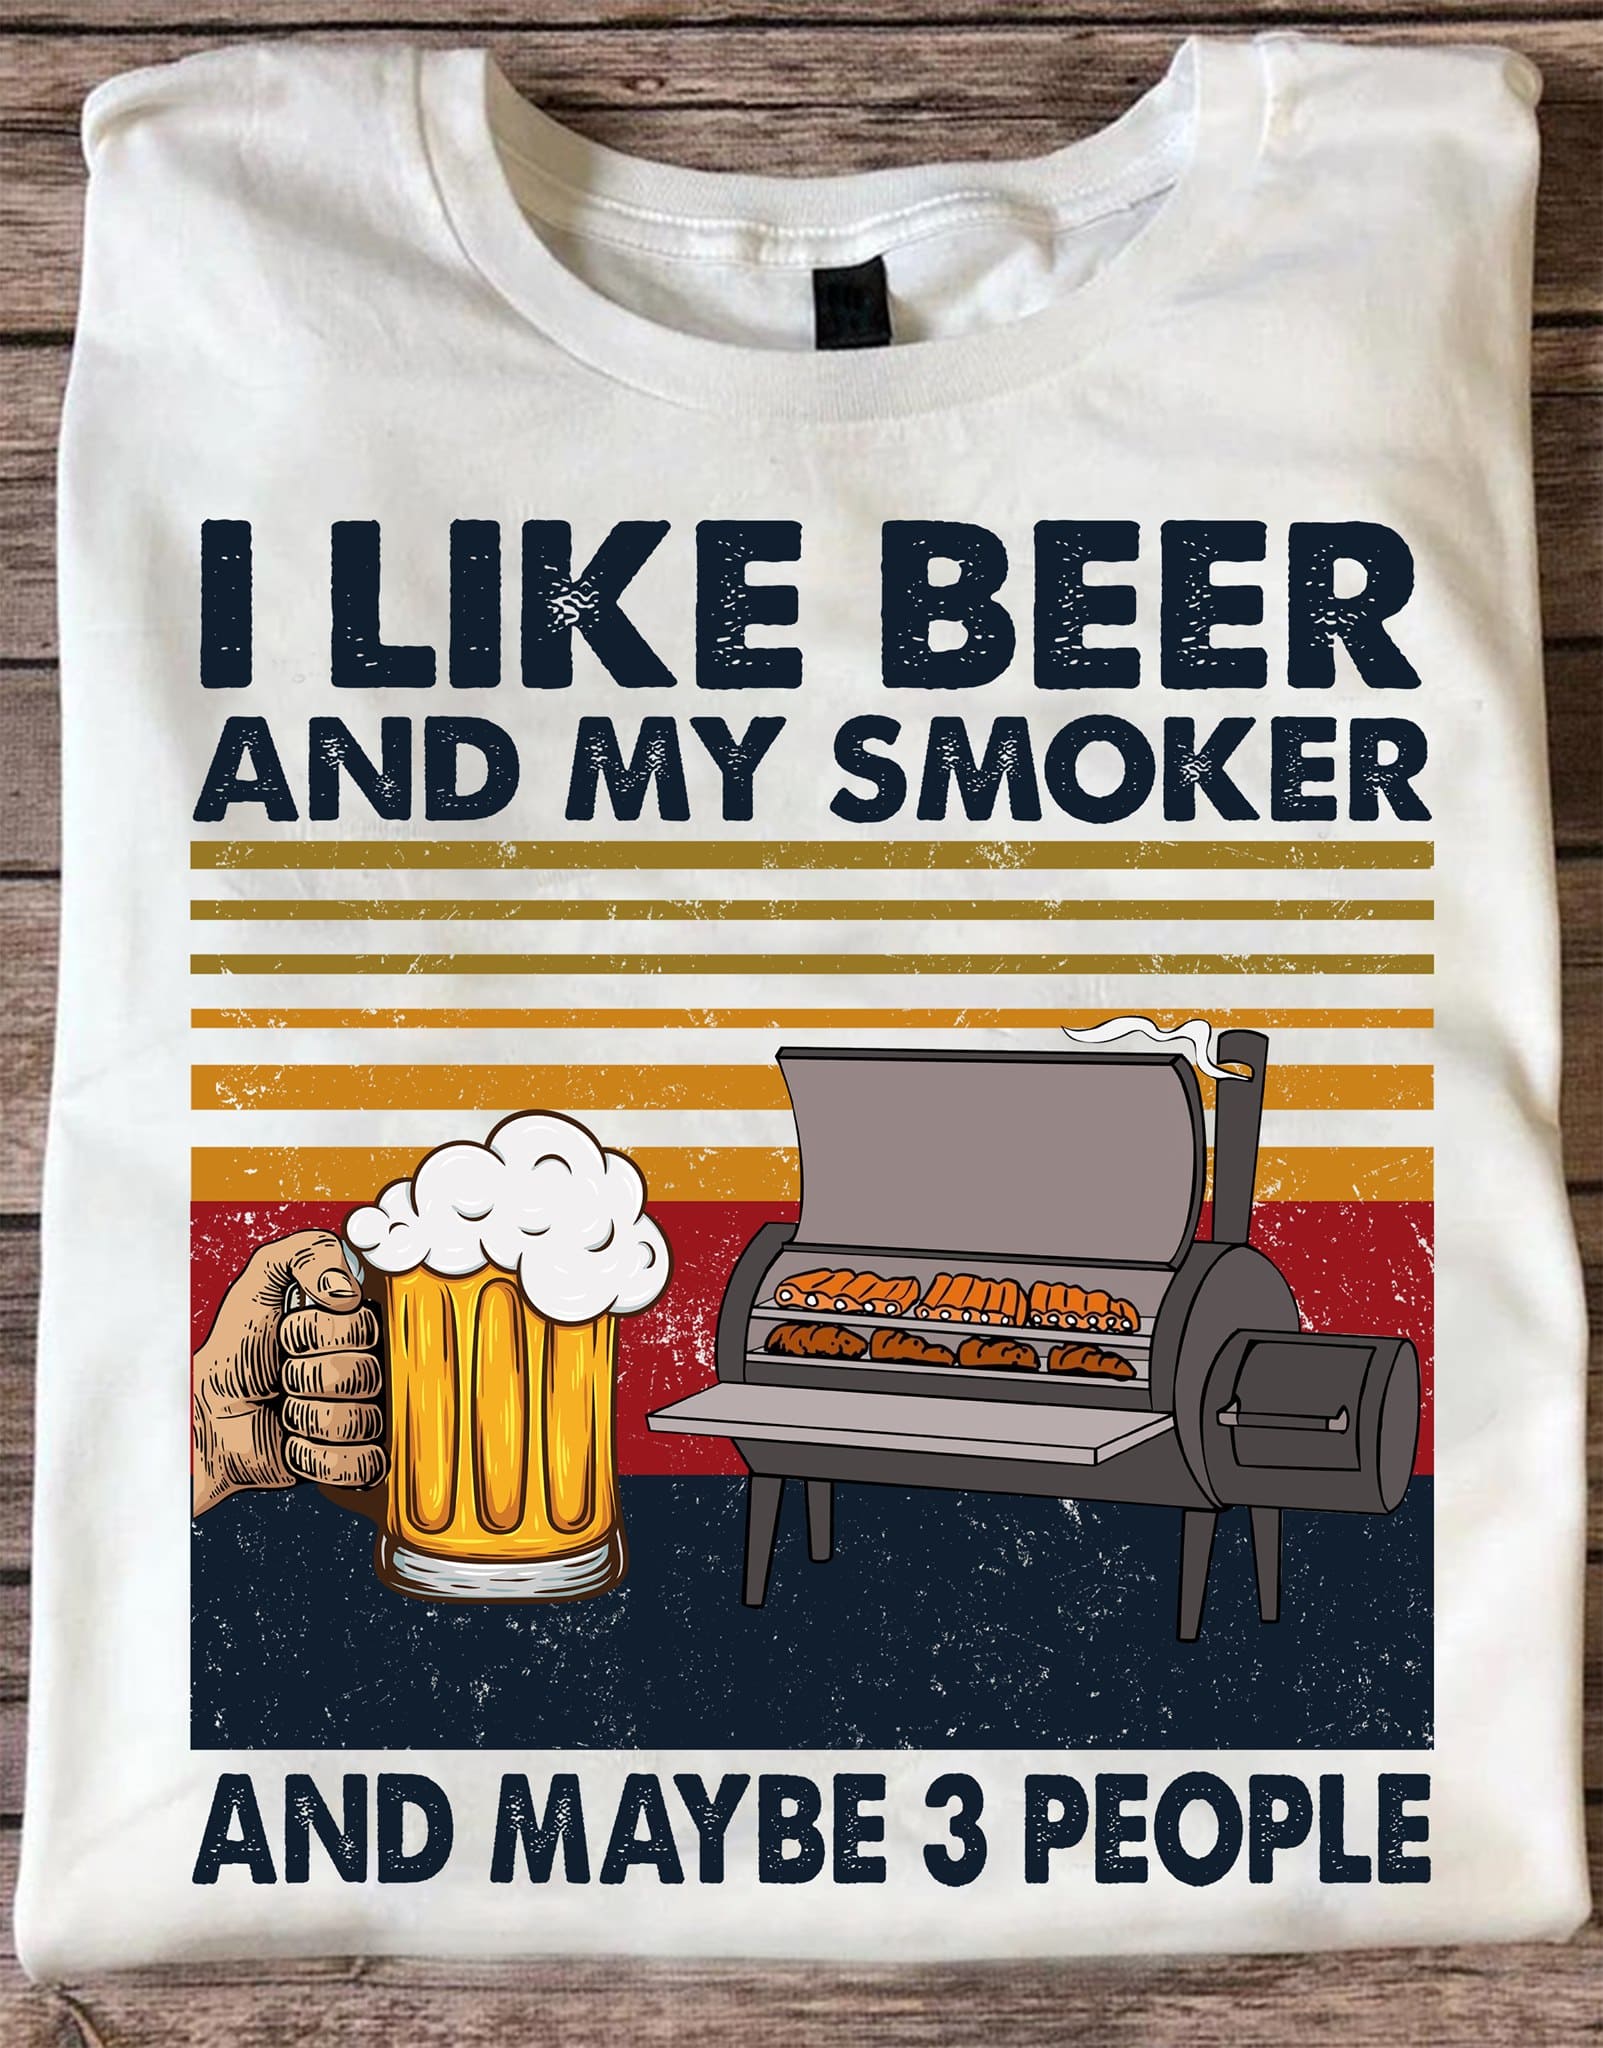 I like beer and my smoker and maybe 3 people - Smoker grill machine, beer drinker T-shirt